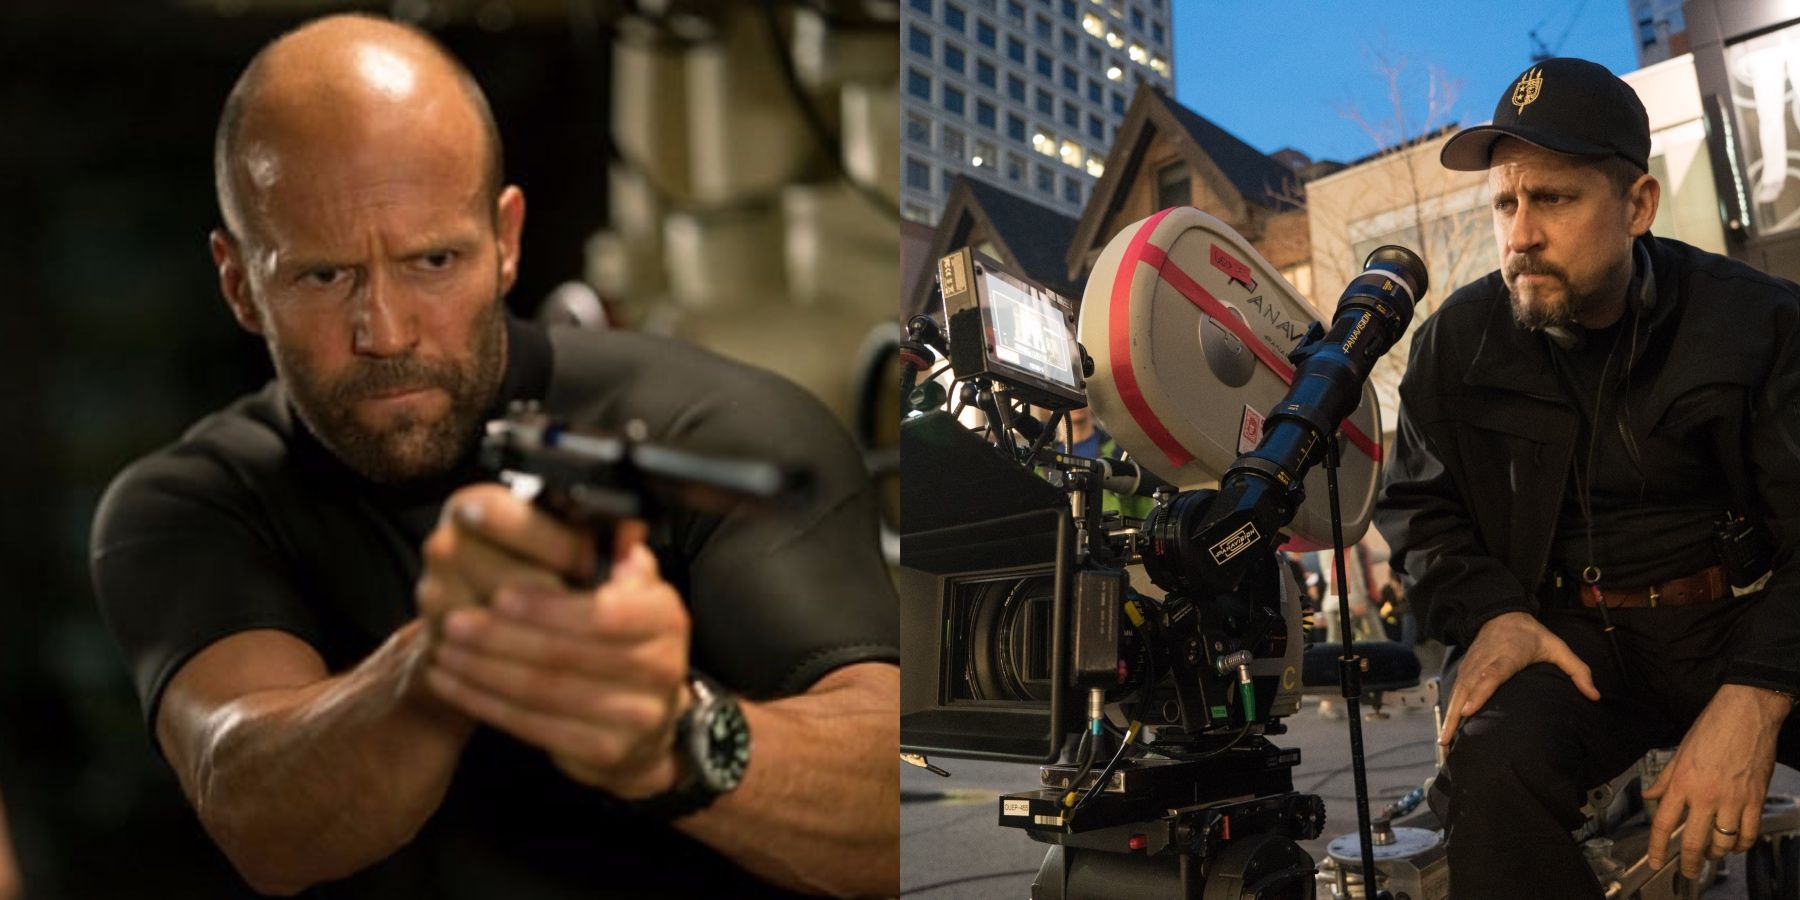 Suicide Squad Director David Ayer Joins Jason Statham's Beekeeper Film